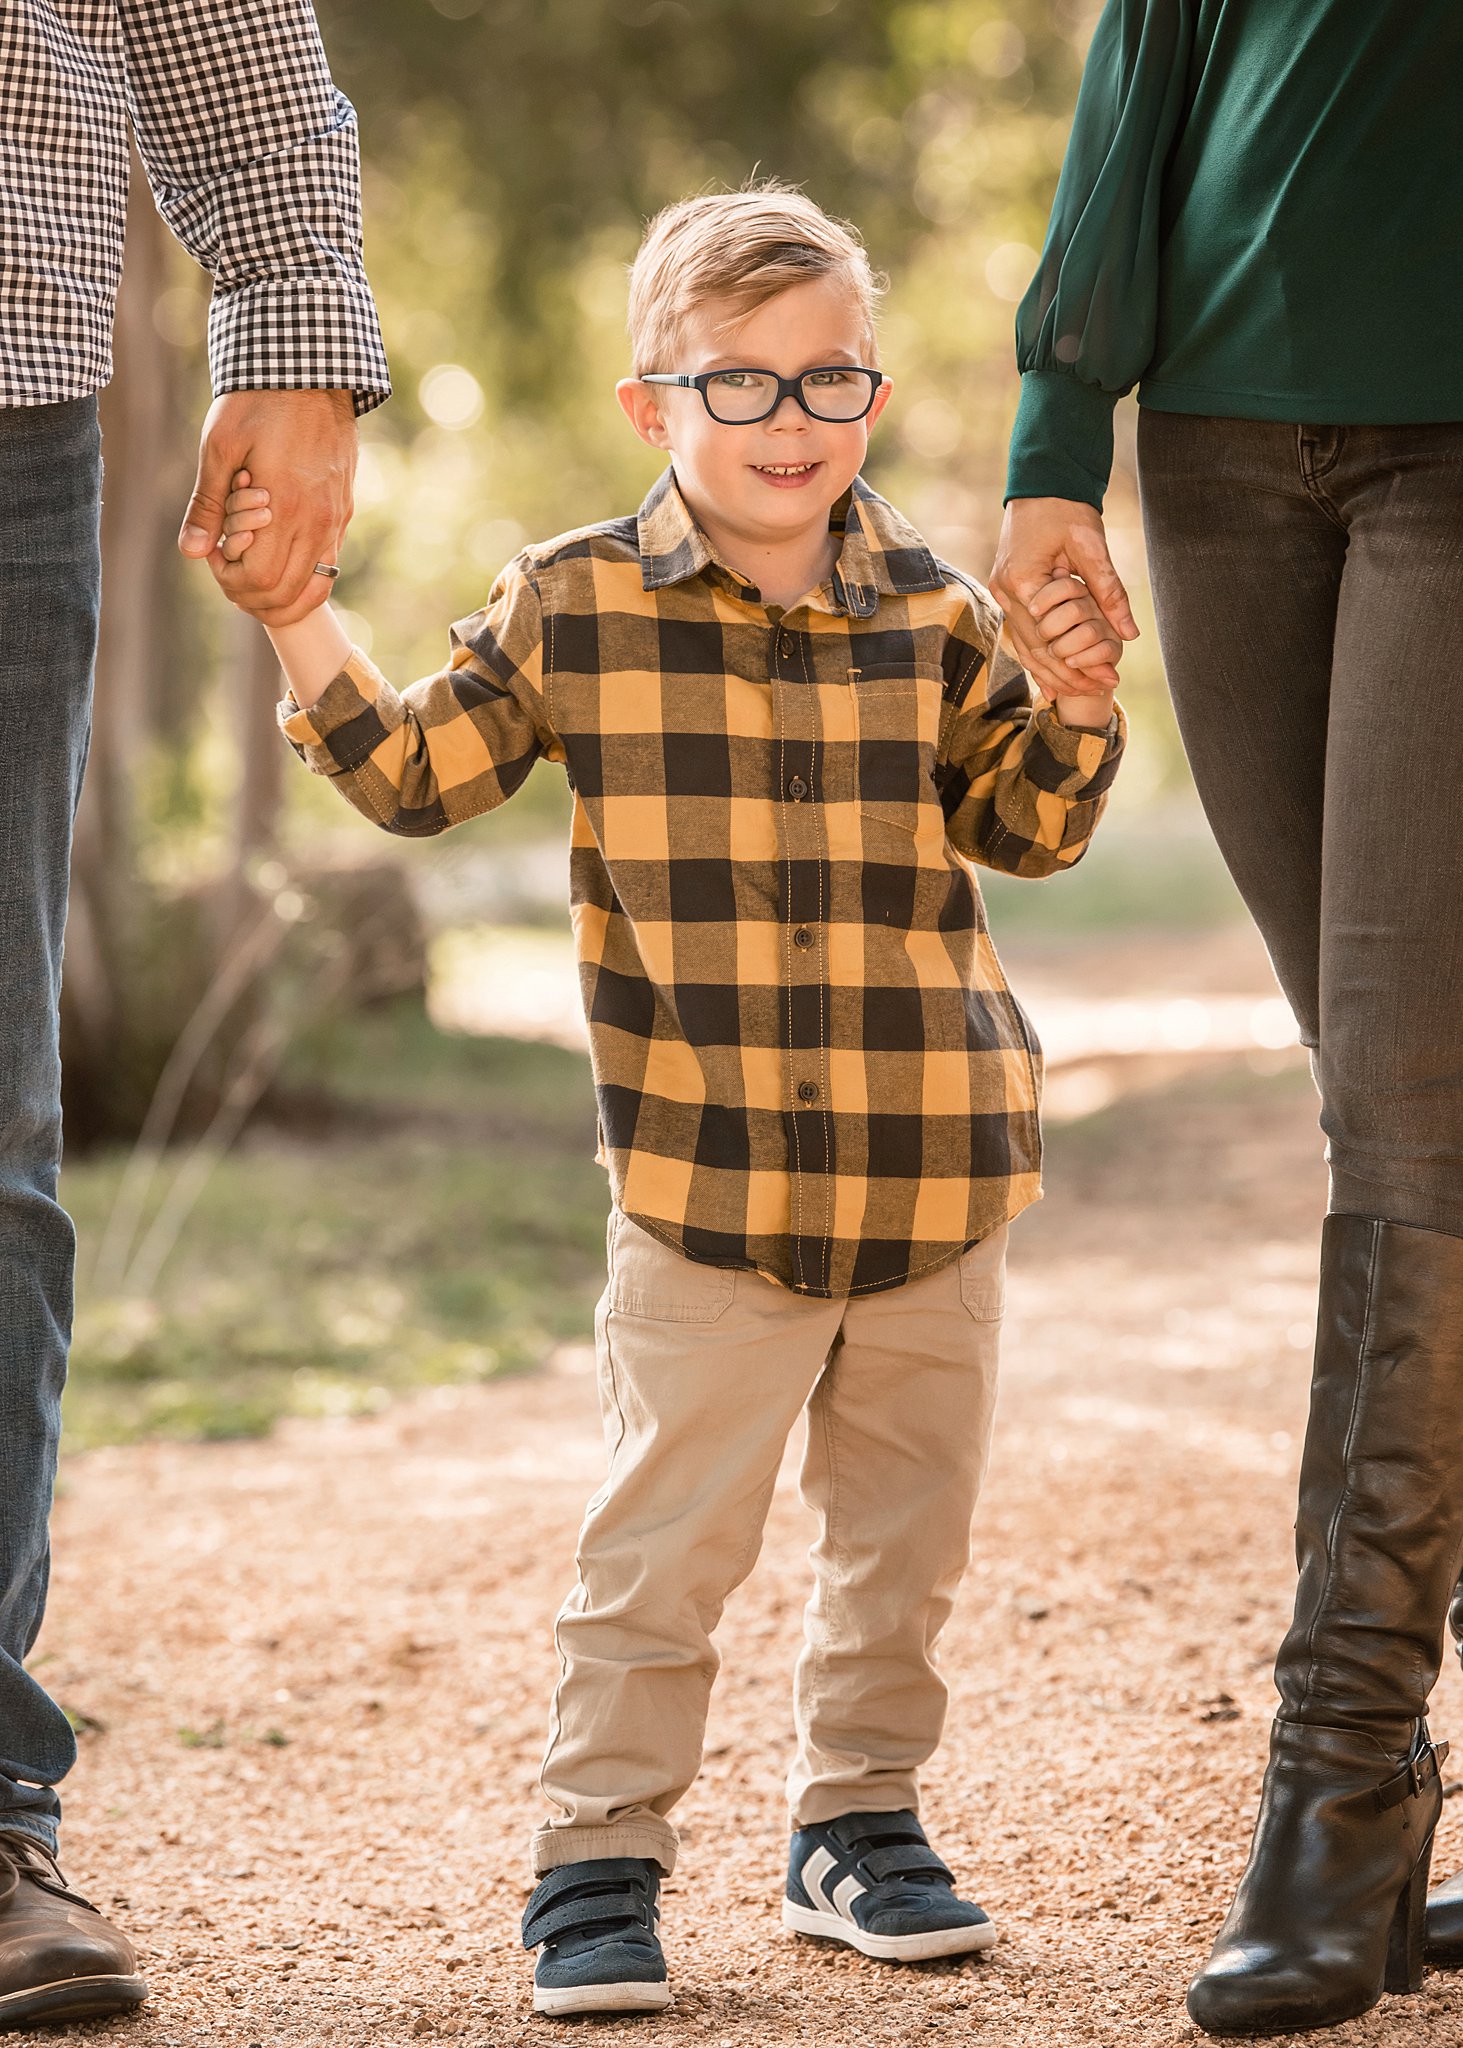 A young boy in a yellow plaid shirt stands in a park path holding his parents' hands on either side